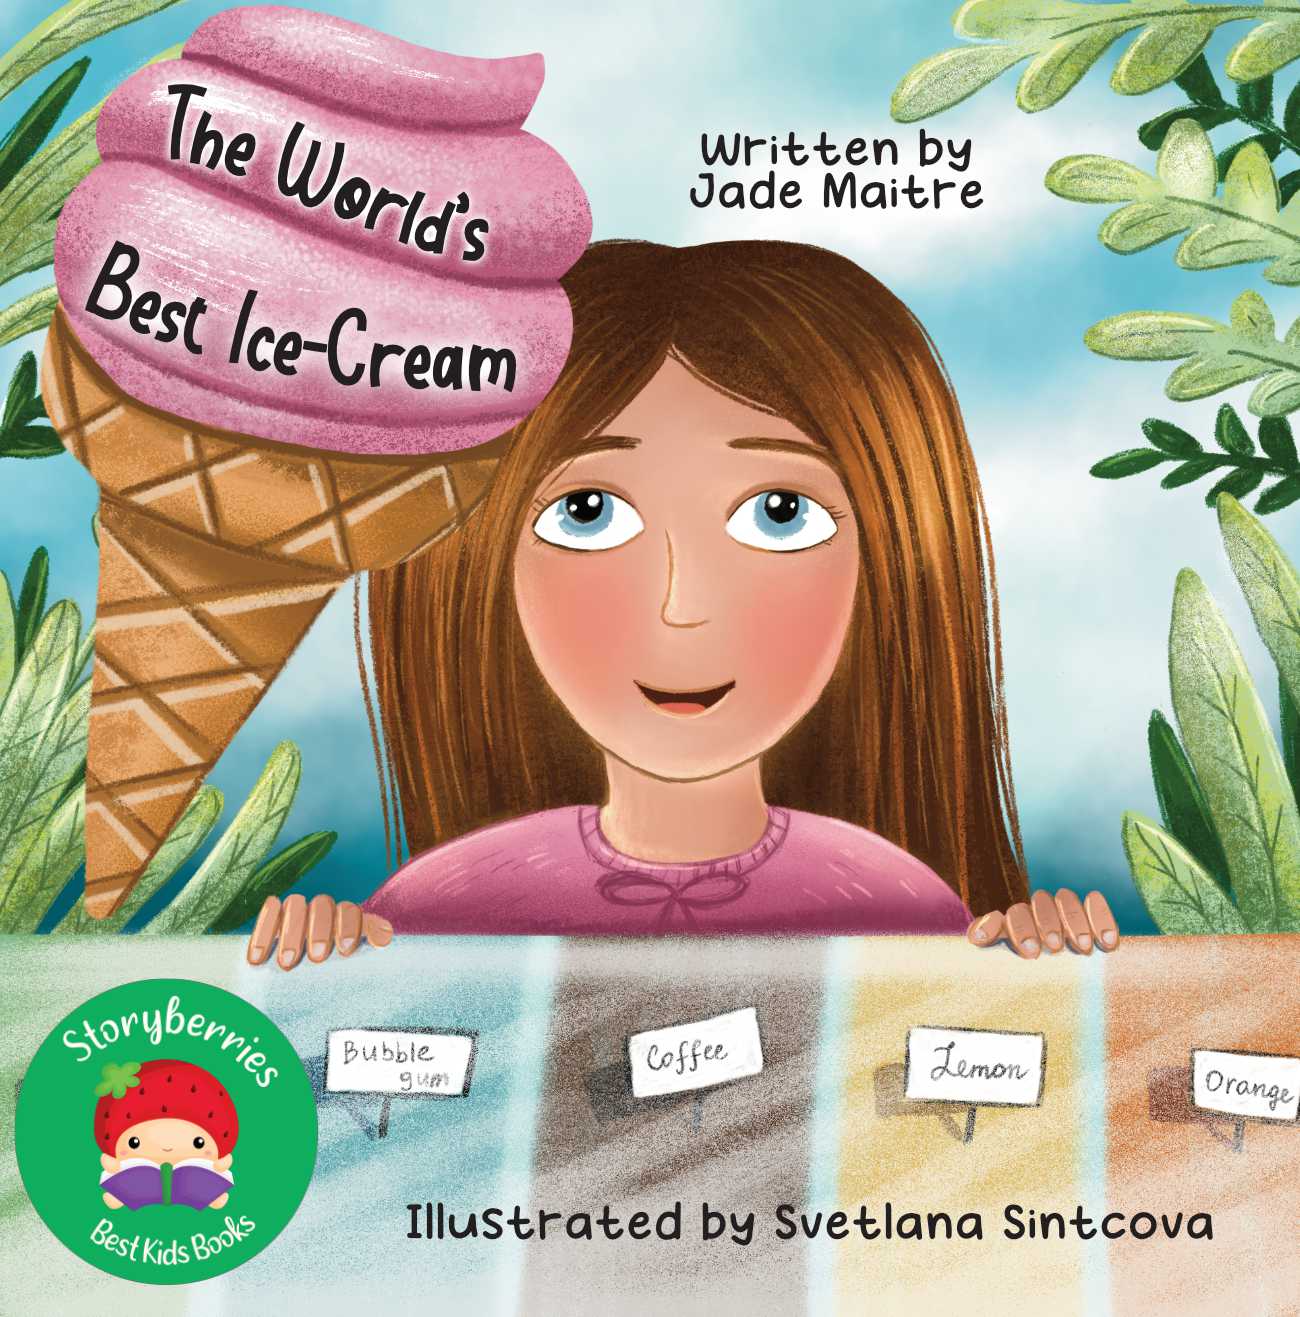 Bedtime Stories The Worlds Best Ice Cream by Jade Maitre short stories for kids cover